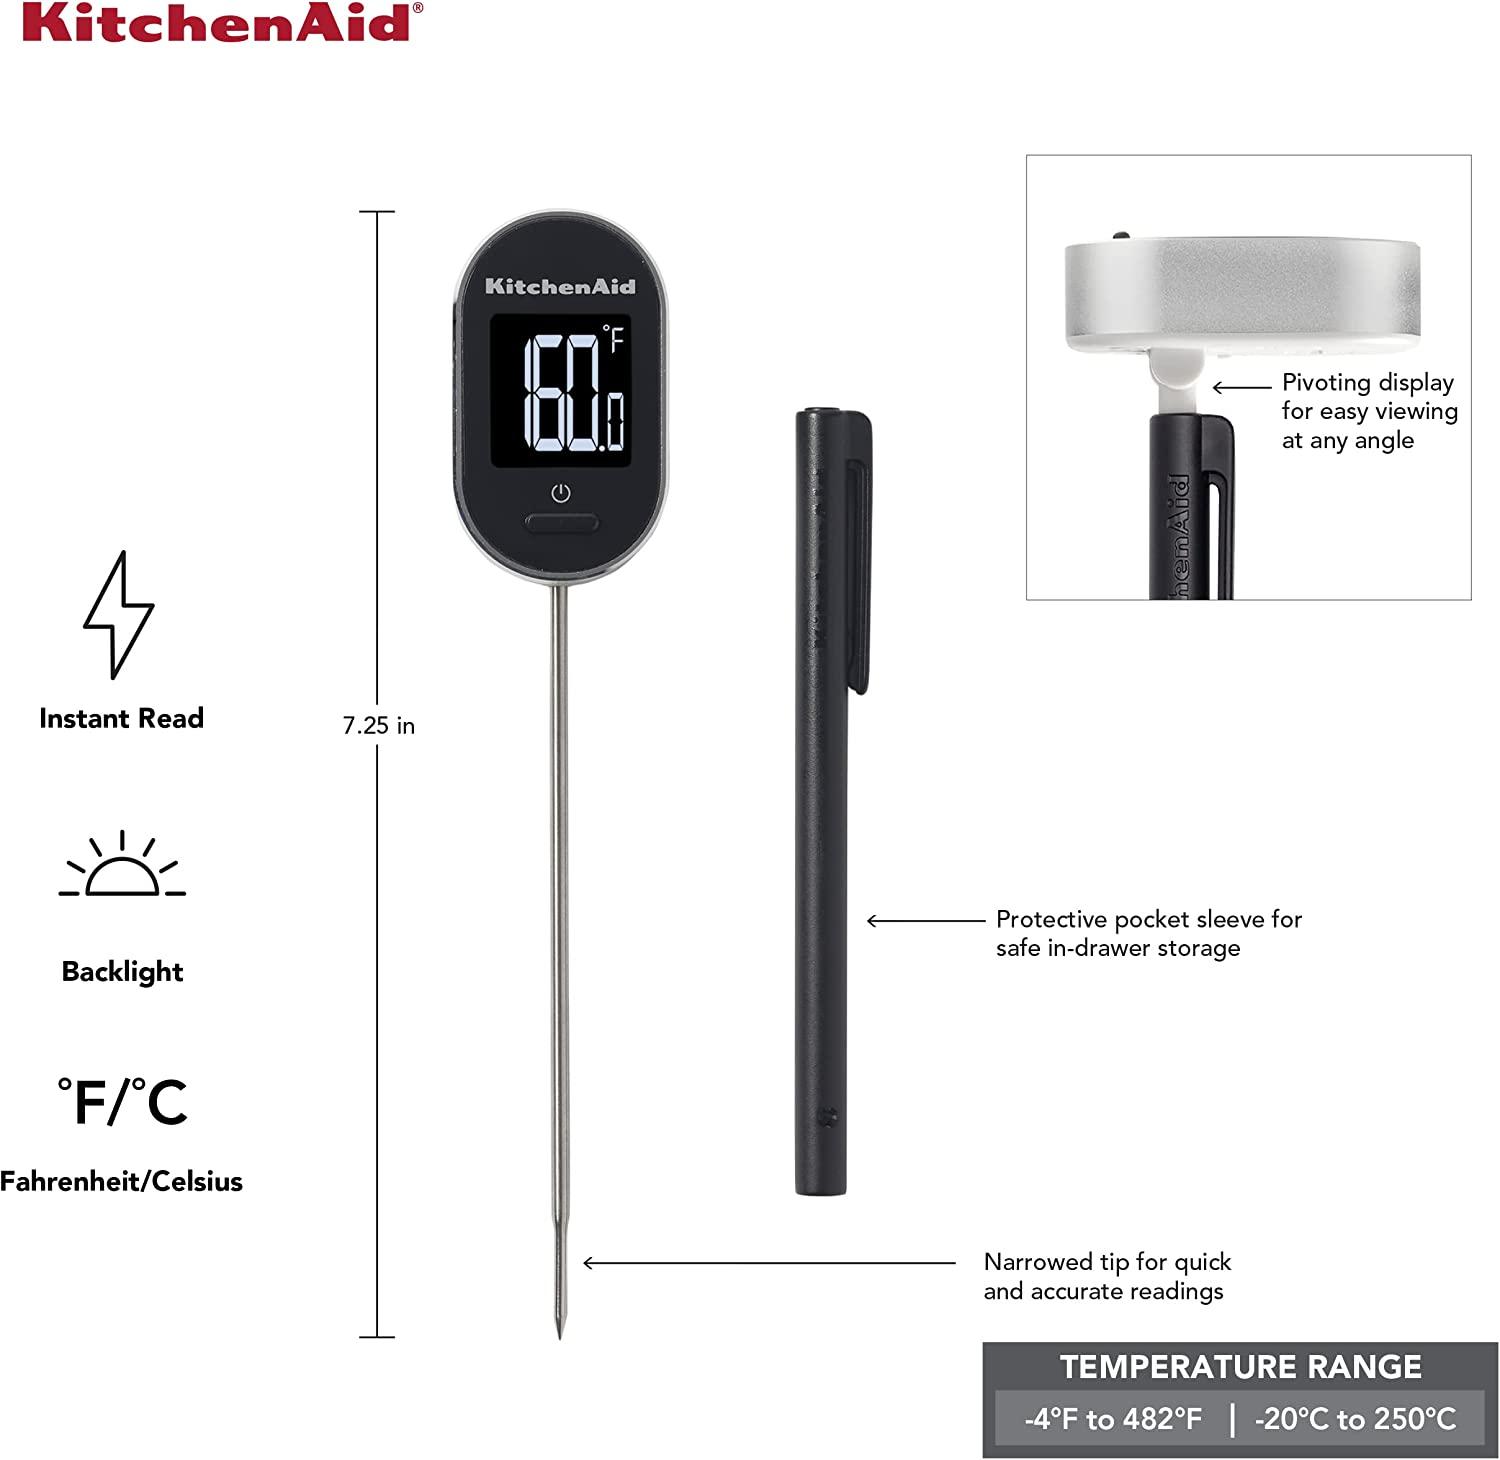  KitchenAid KQ902 Leave-in, Oven/Grill safe Meat